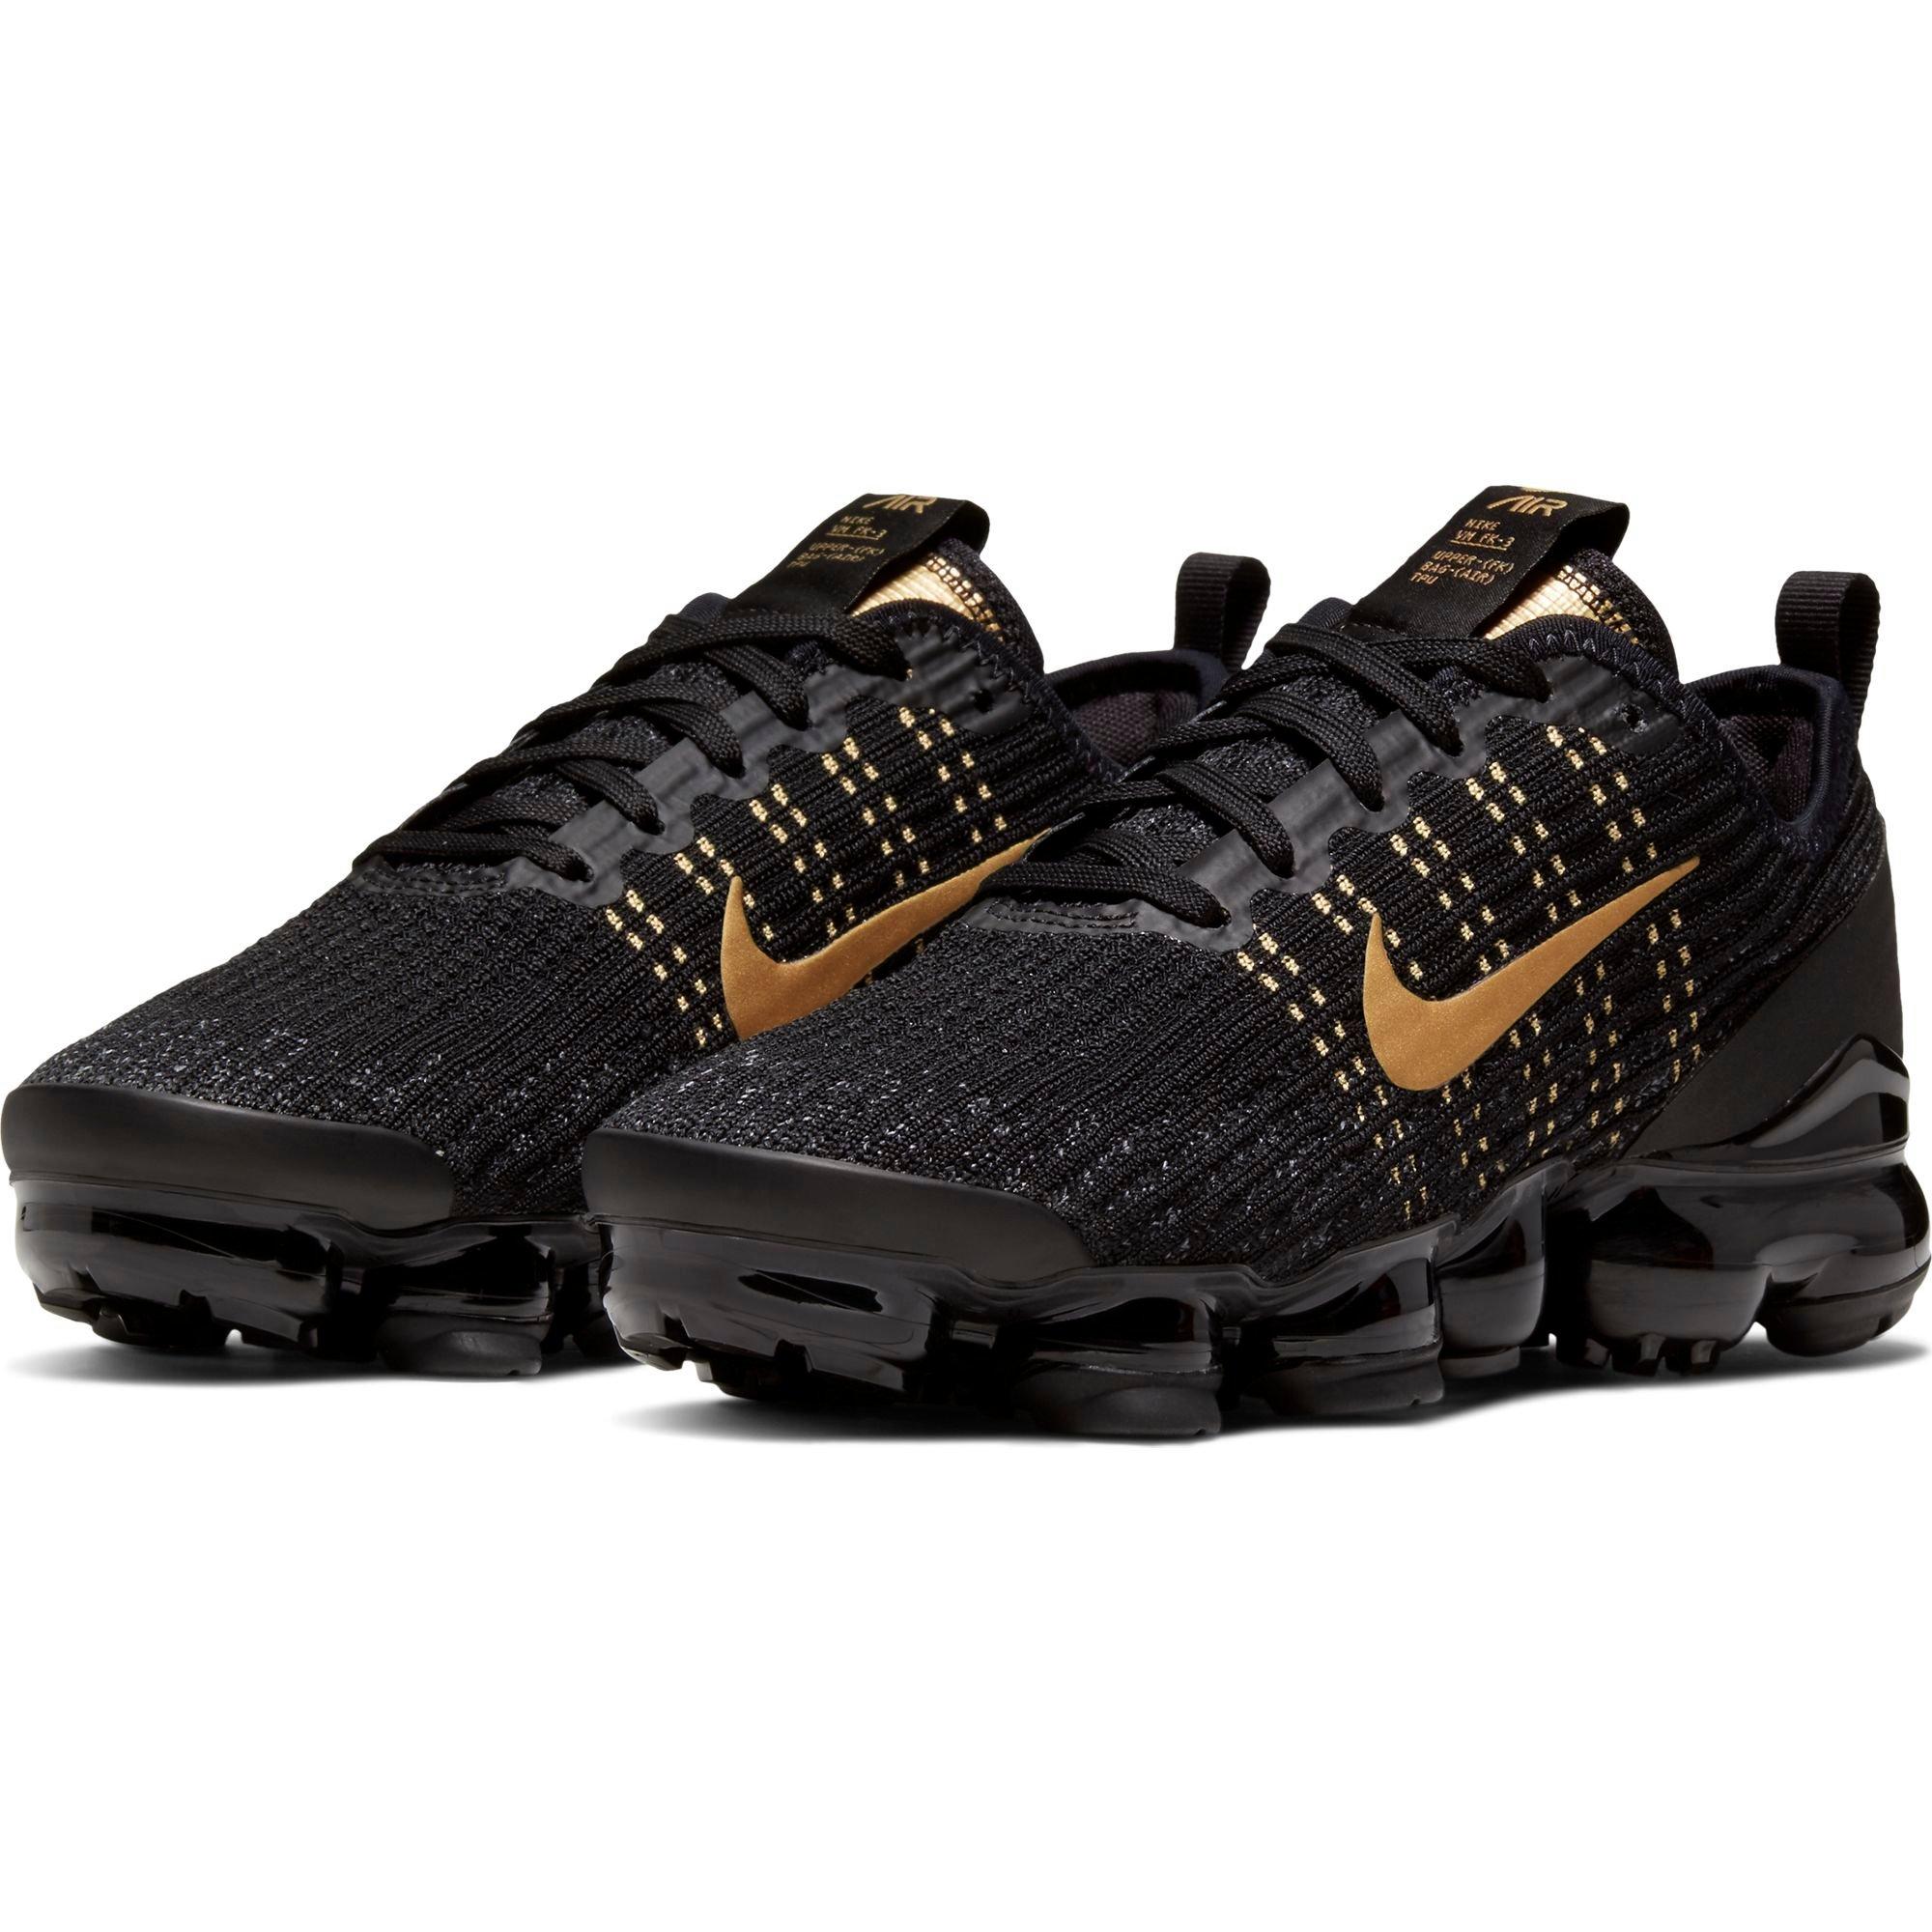 vapormax flyknit 3 black and gold